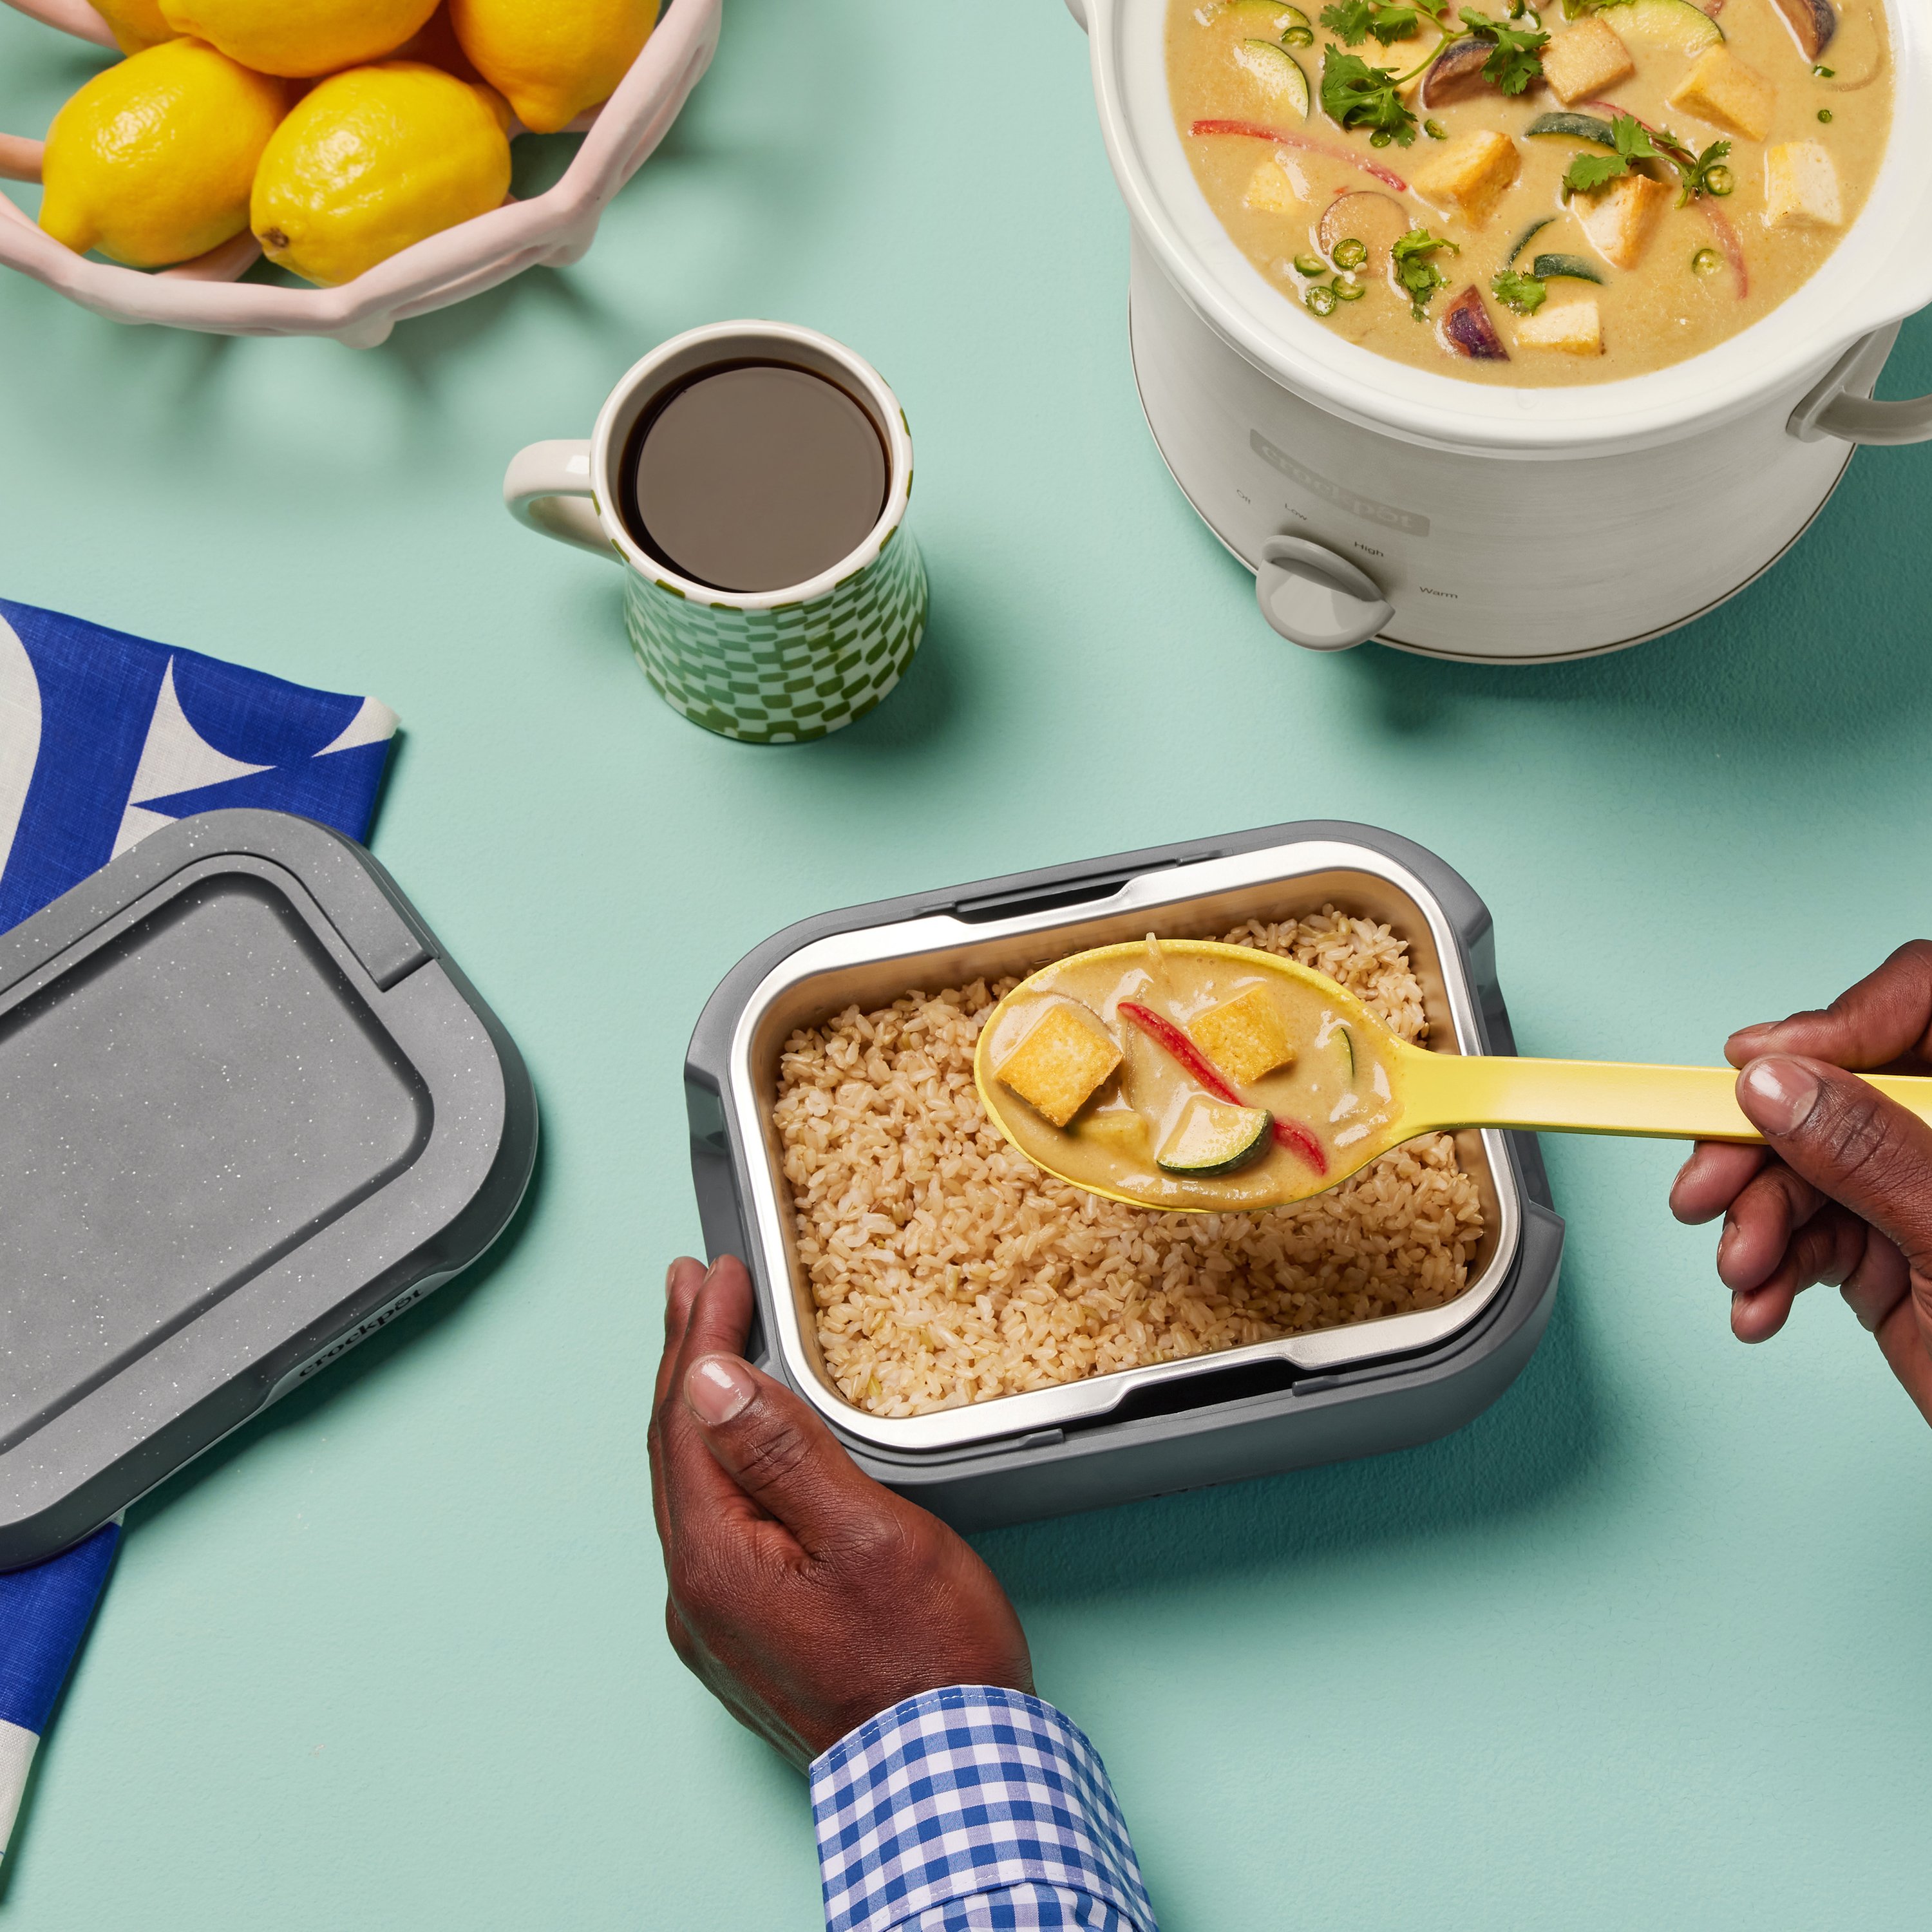 This Portable Crockpot Lunch Box Will Warm Up Your Food at Just $36